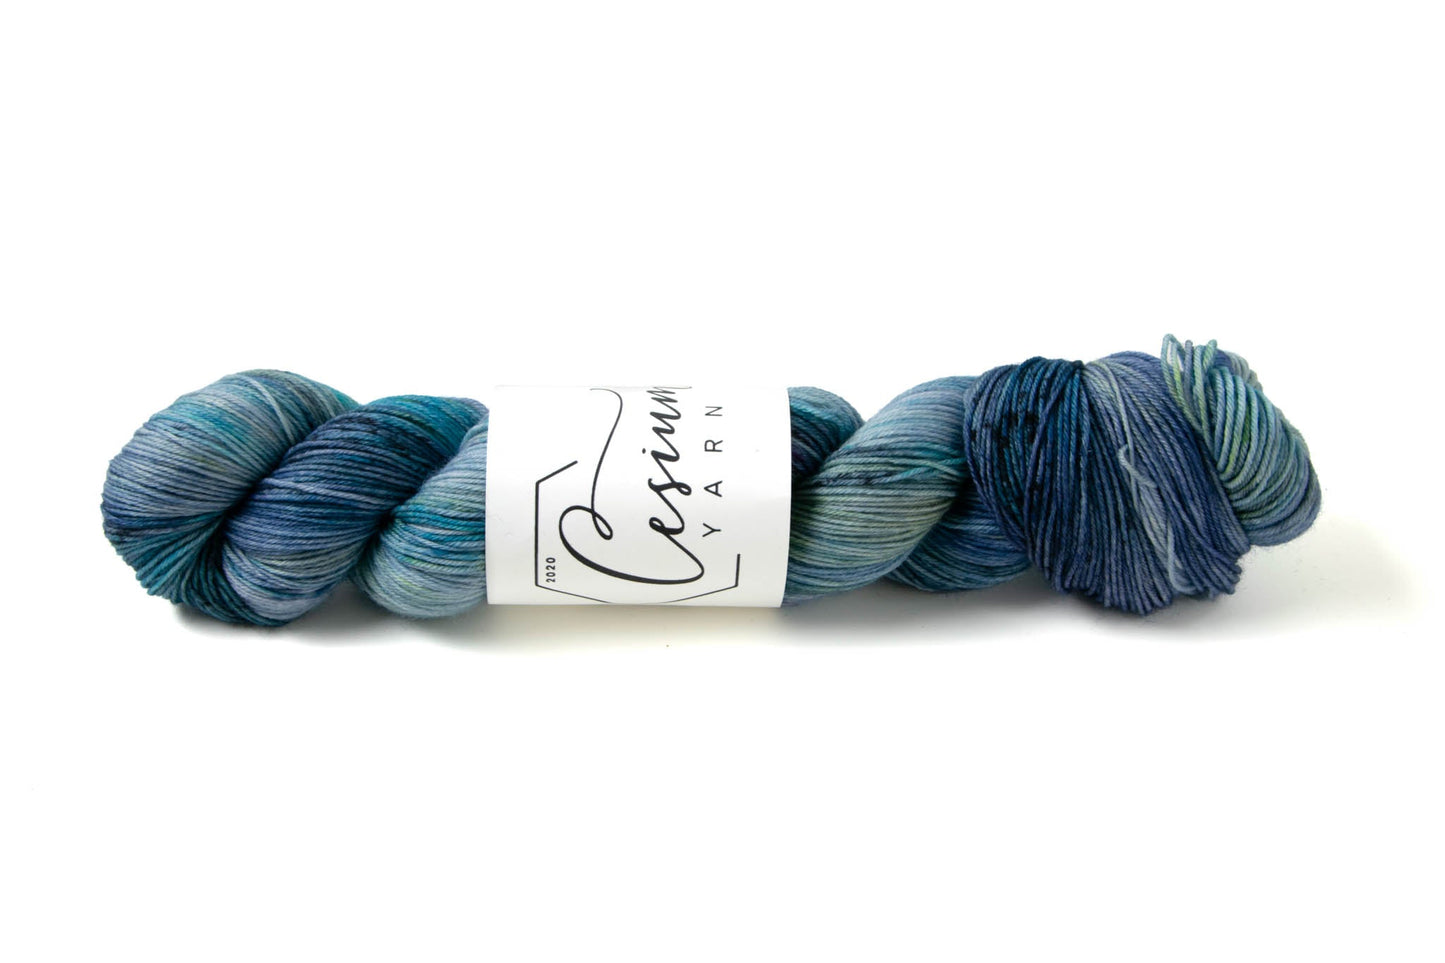 A skein of variegated blue yarn with green sections.